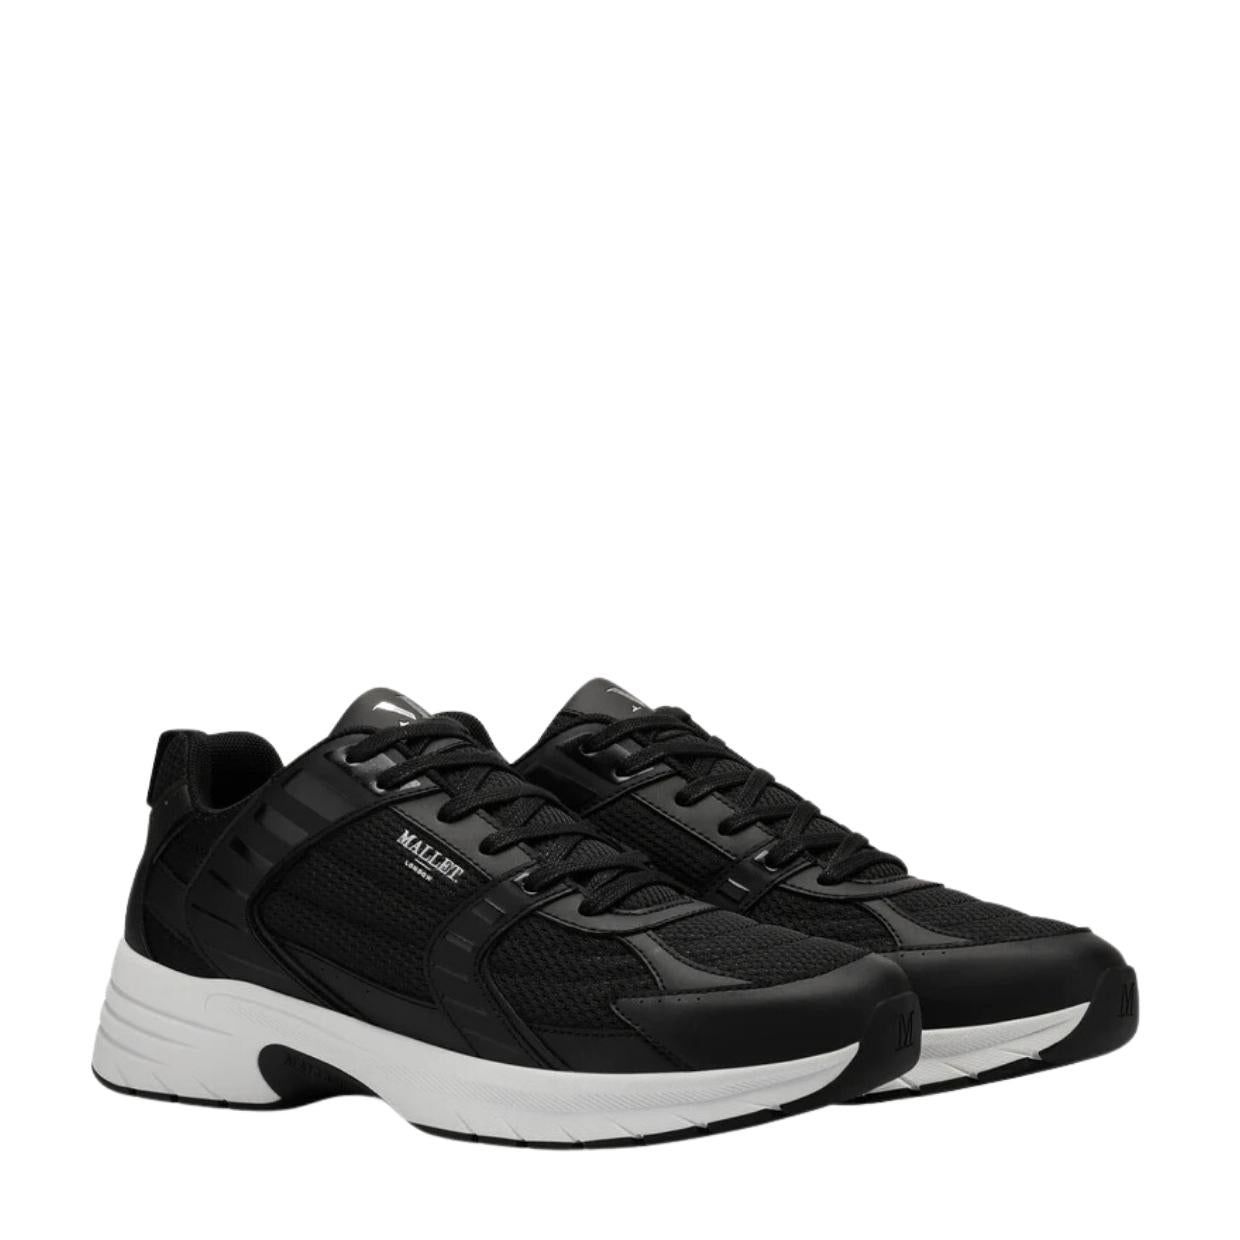 Mallet Holloway Black Trainers